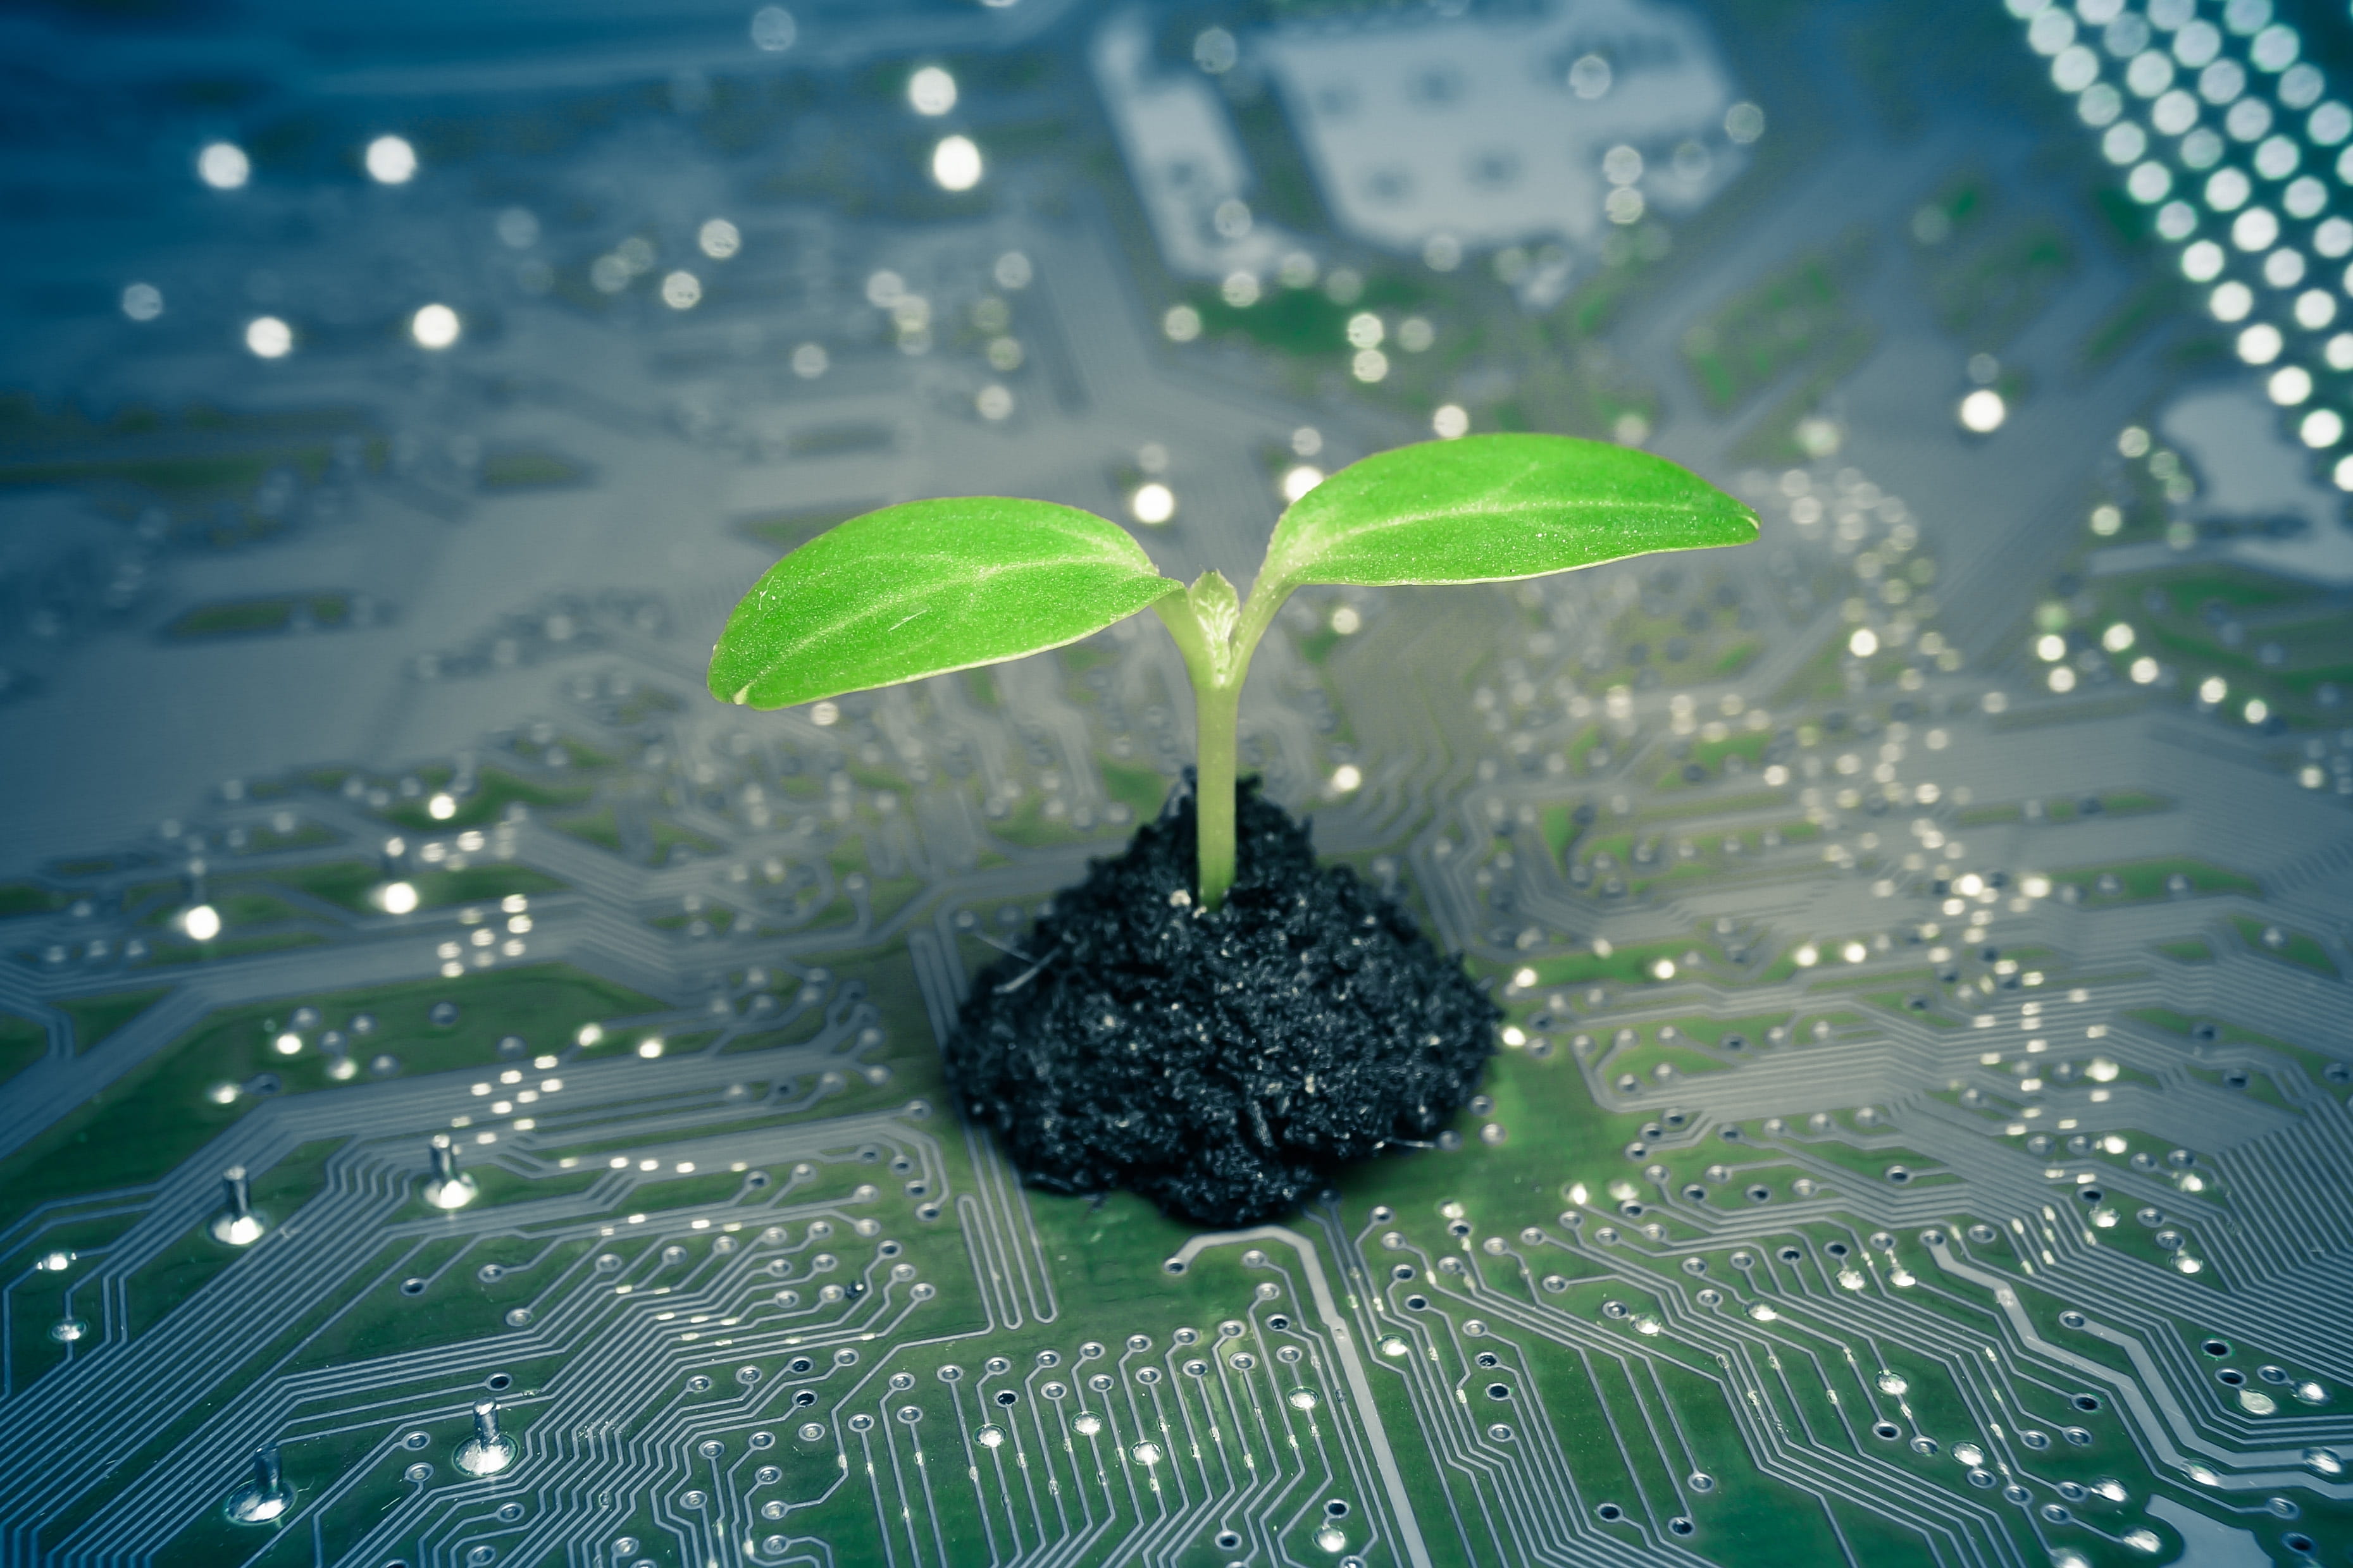 A seedling grows out of a circuit board to represent recycling electronics